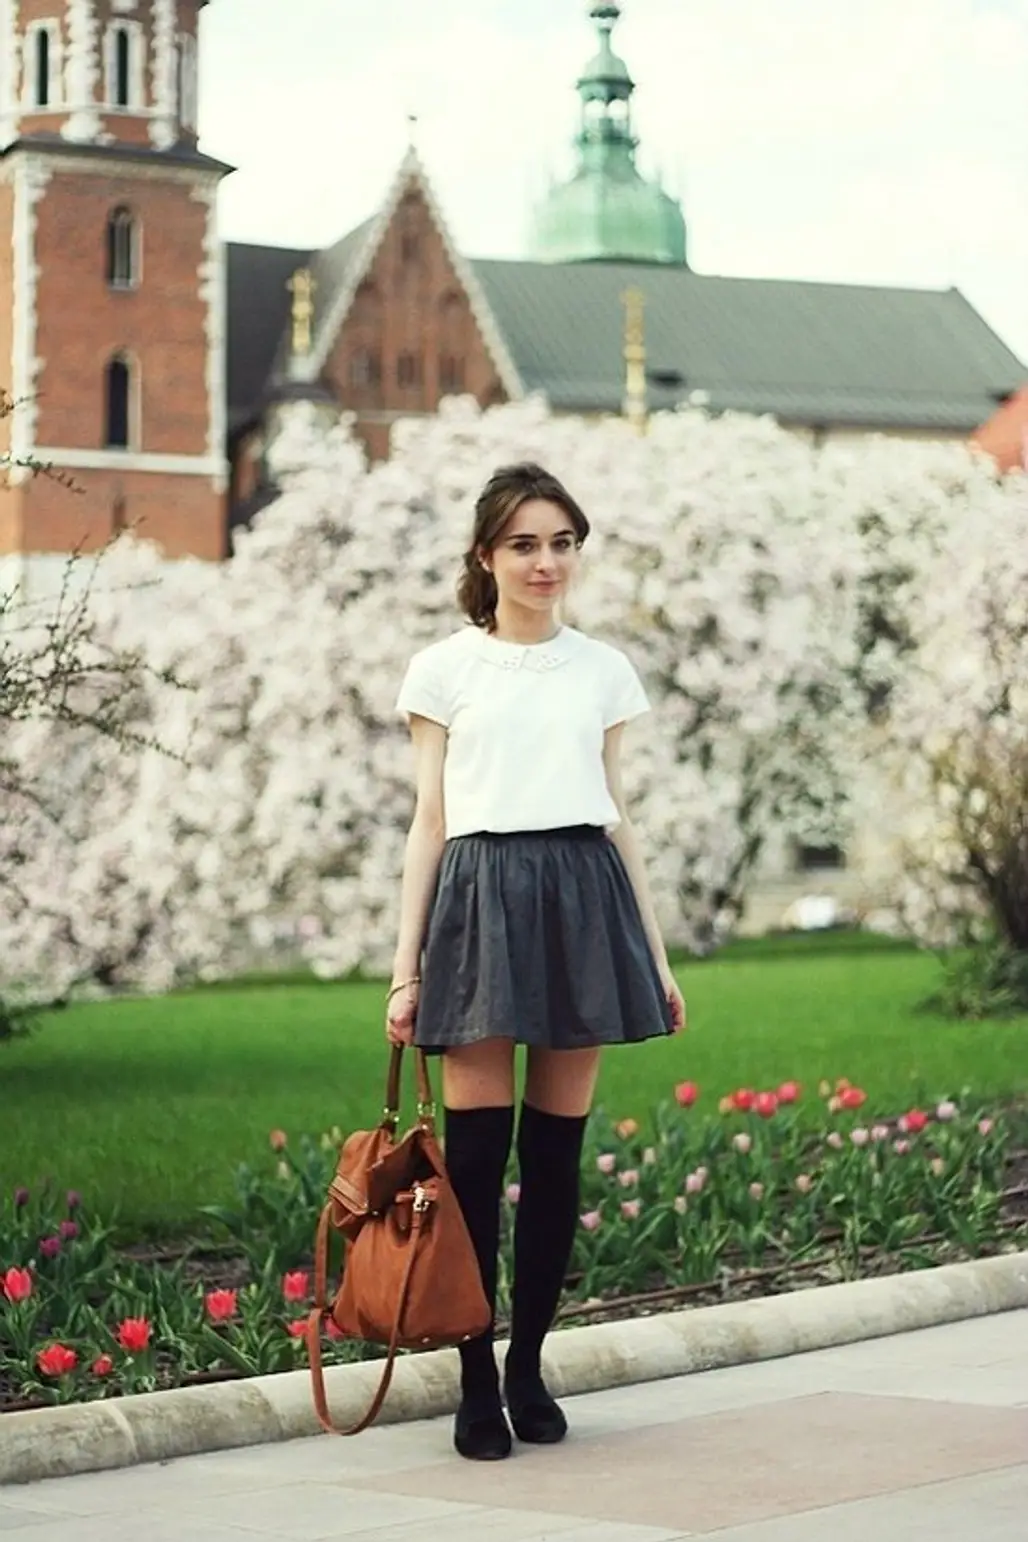 How to Wear Knee High Socks: 19 Stylish Outfit Ideas